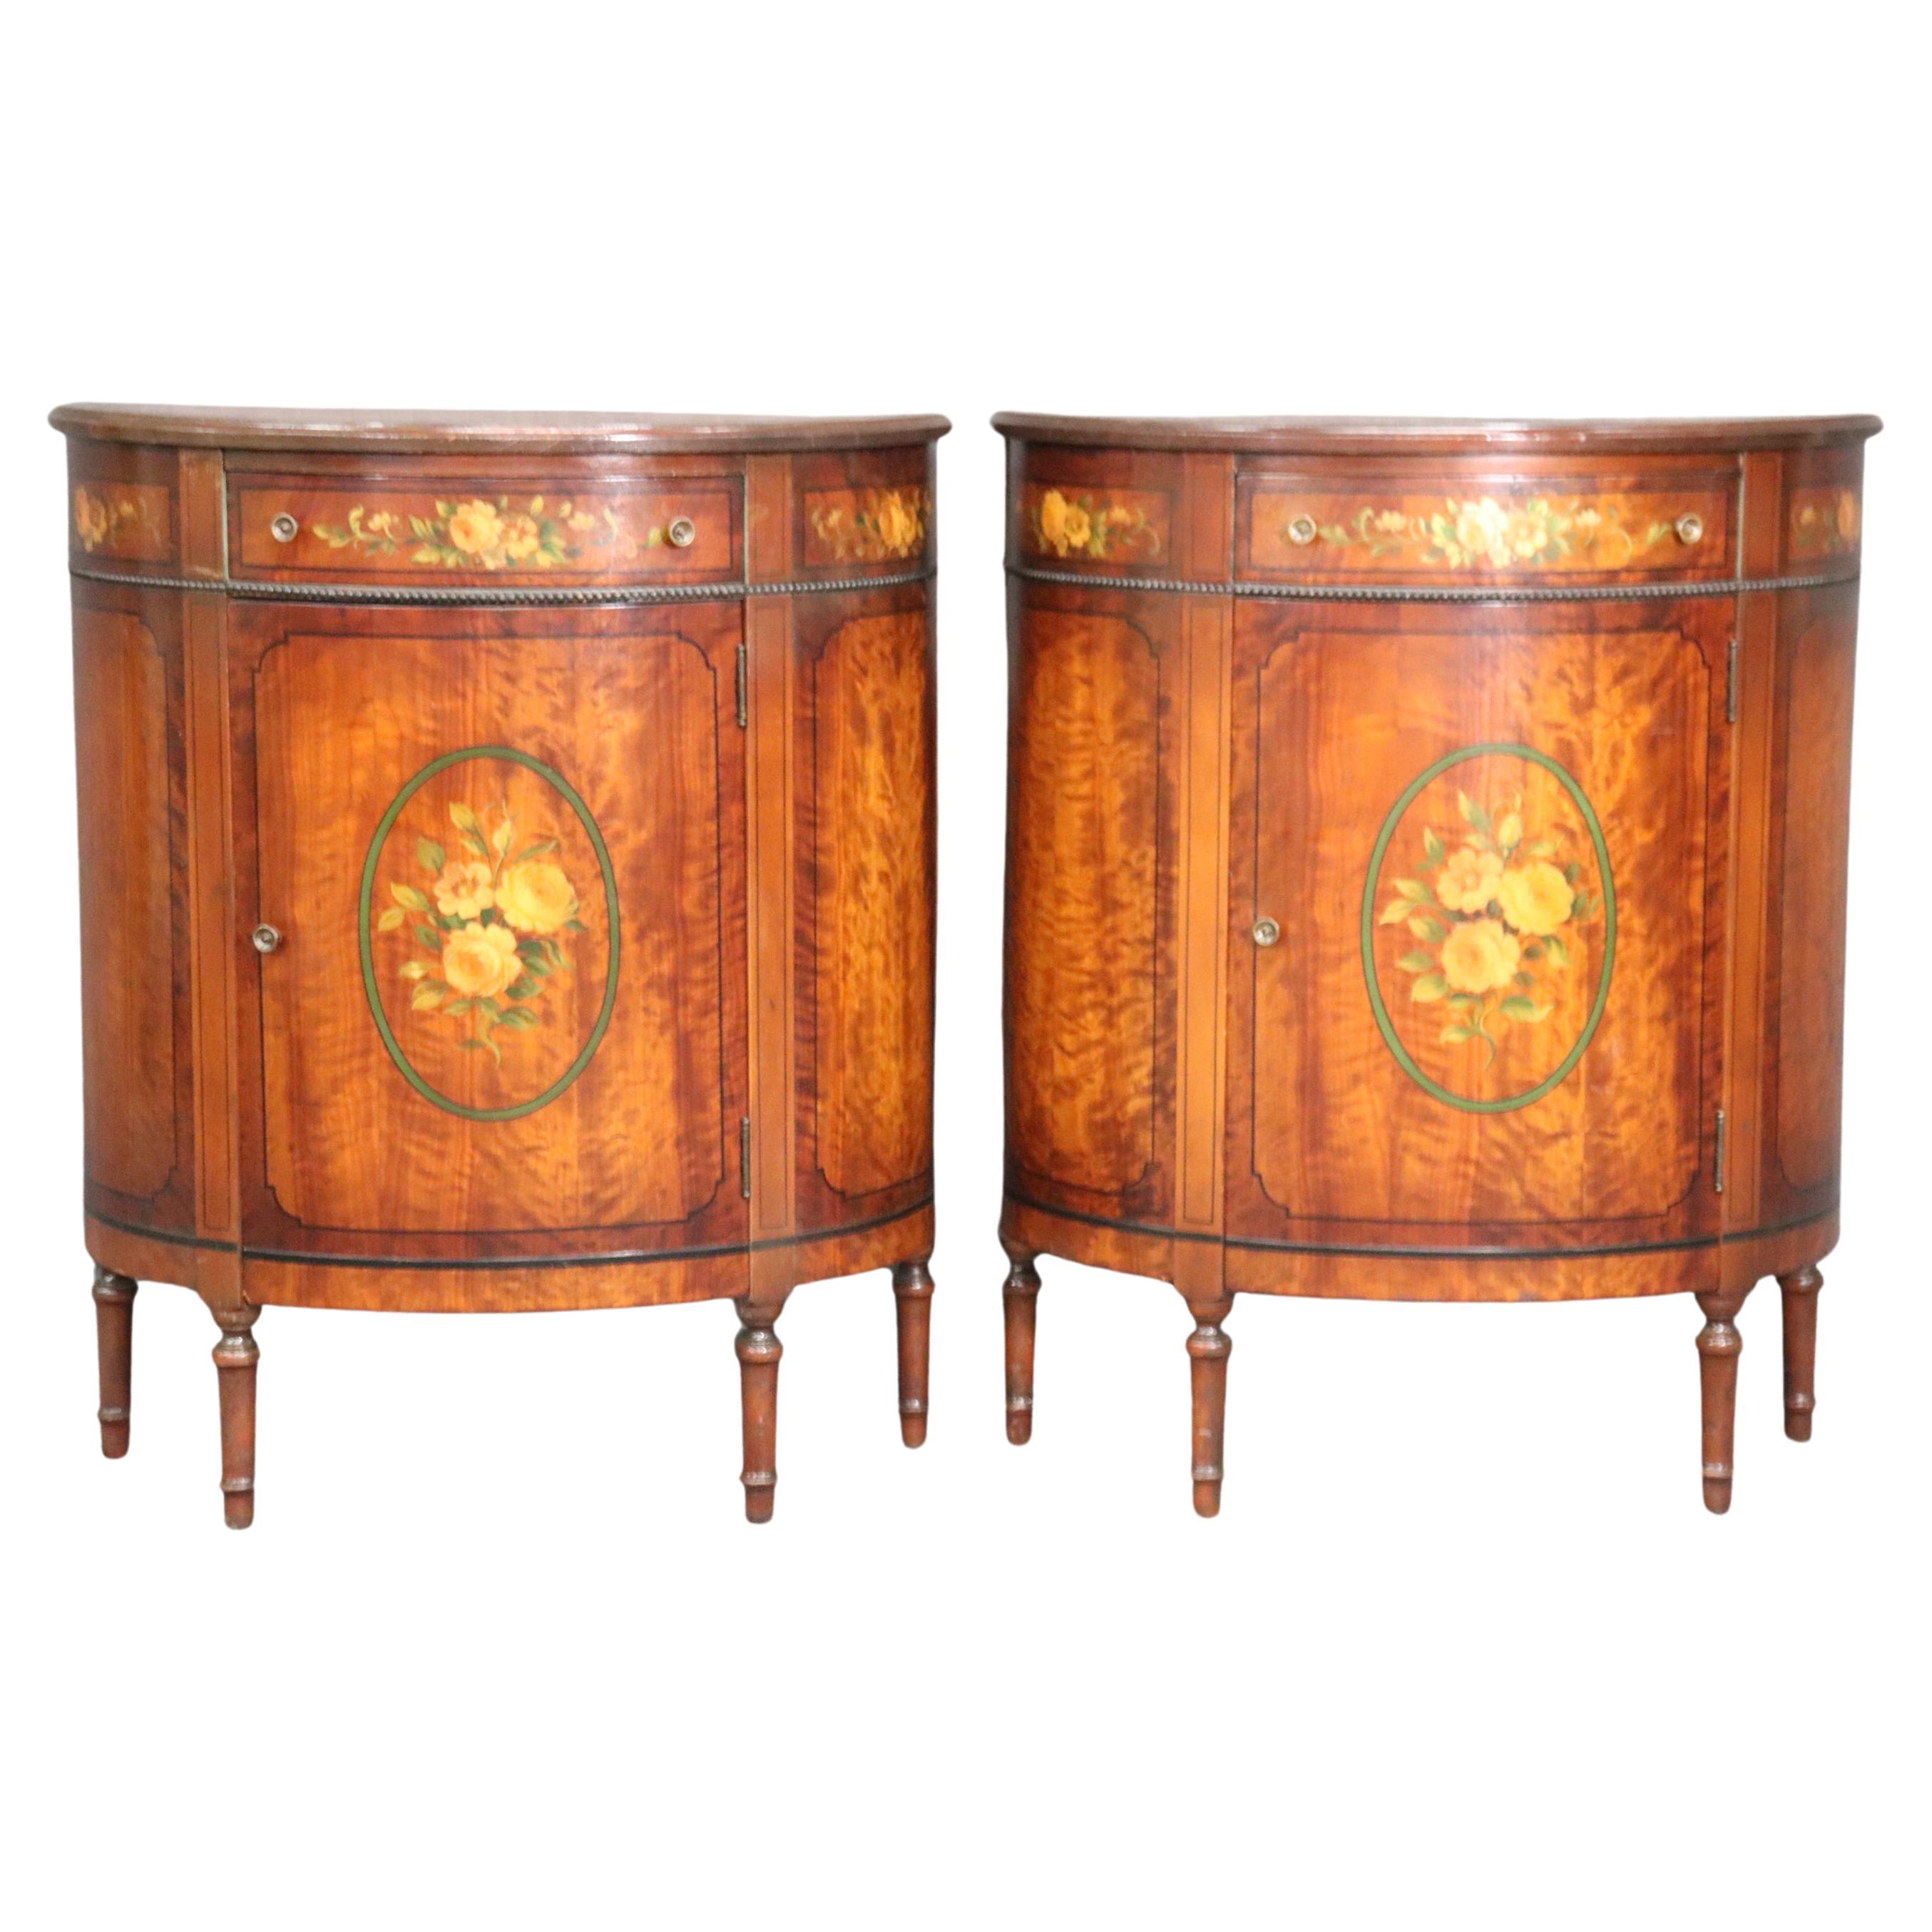 Hand-Painted Pair Adams Walnut Demilune Nightstands Commodes circa 1930s